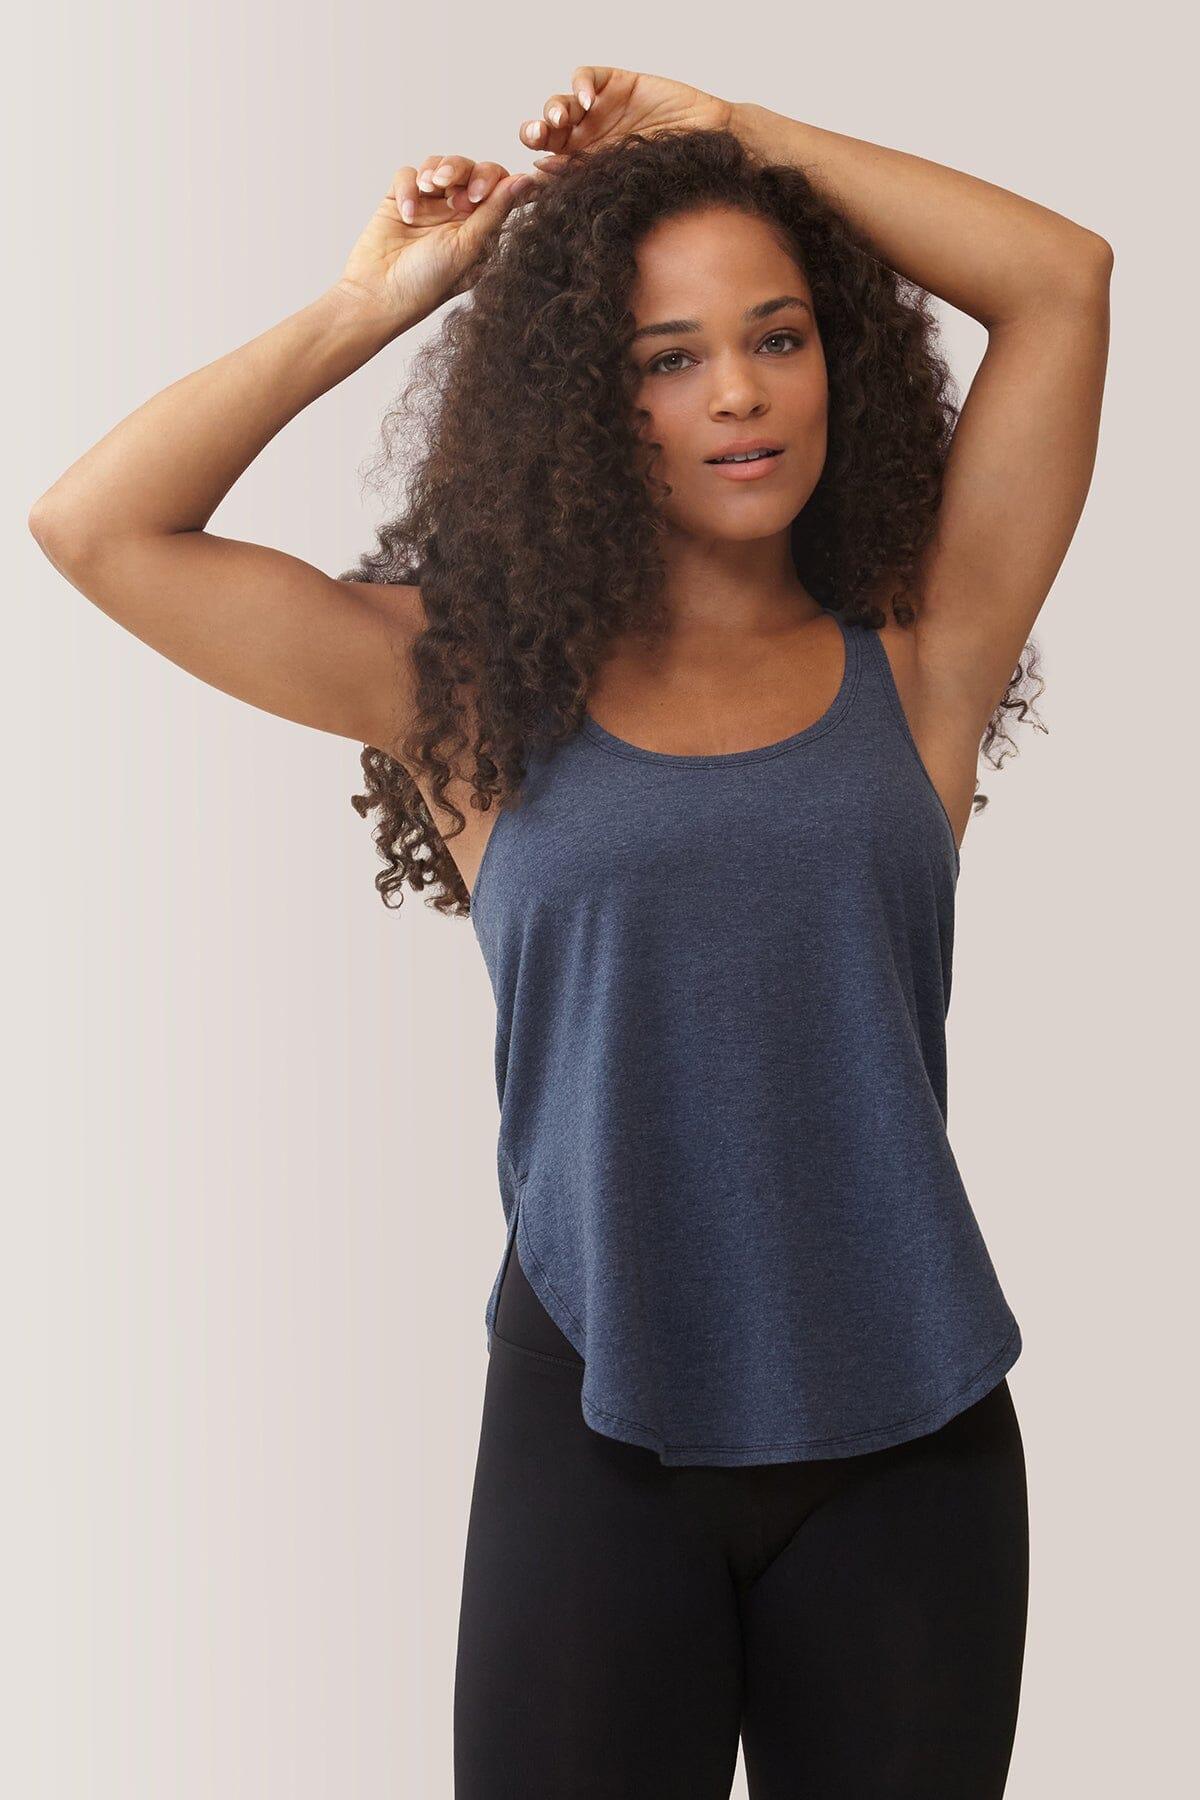 Femme qui porte la camisole Hello Gorgeous! de Rose Boreal./ Women wearing the Hello Gorgeous! Tank Top from Rose Boreal. -Midnight